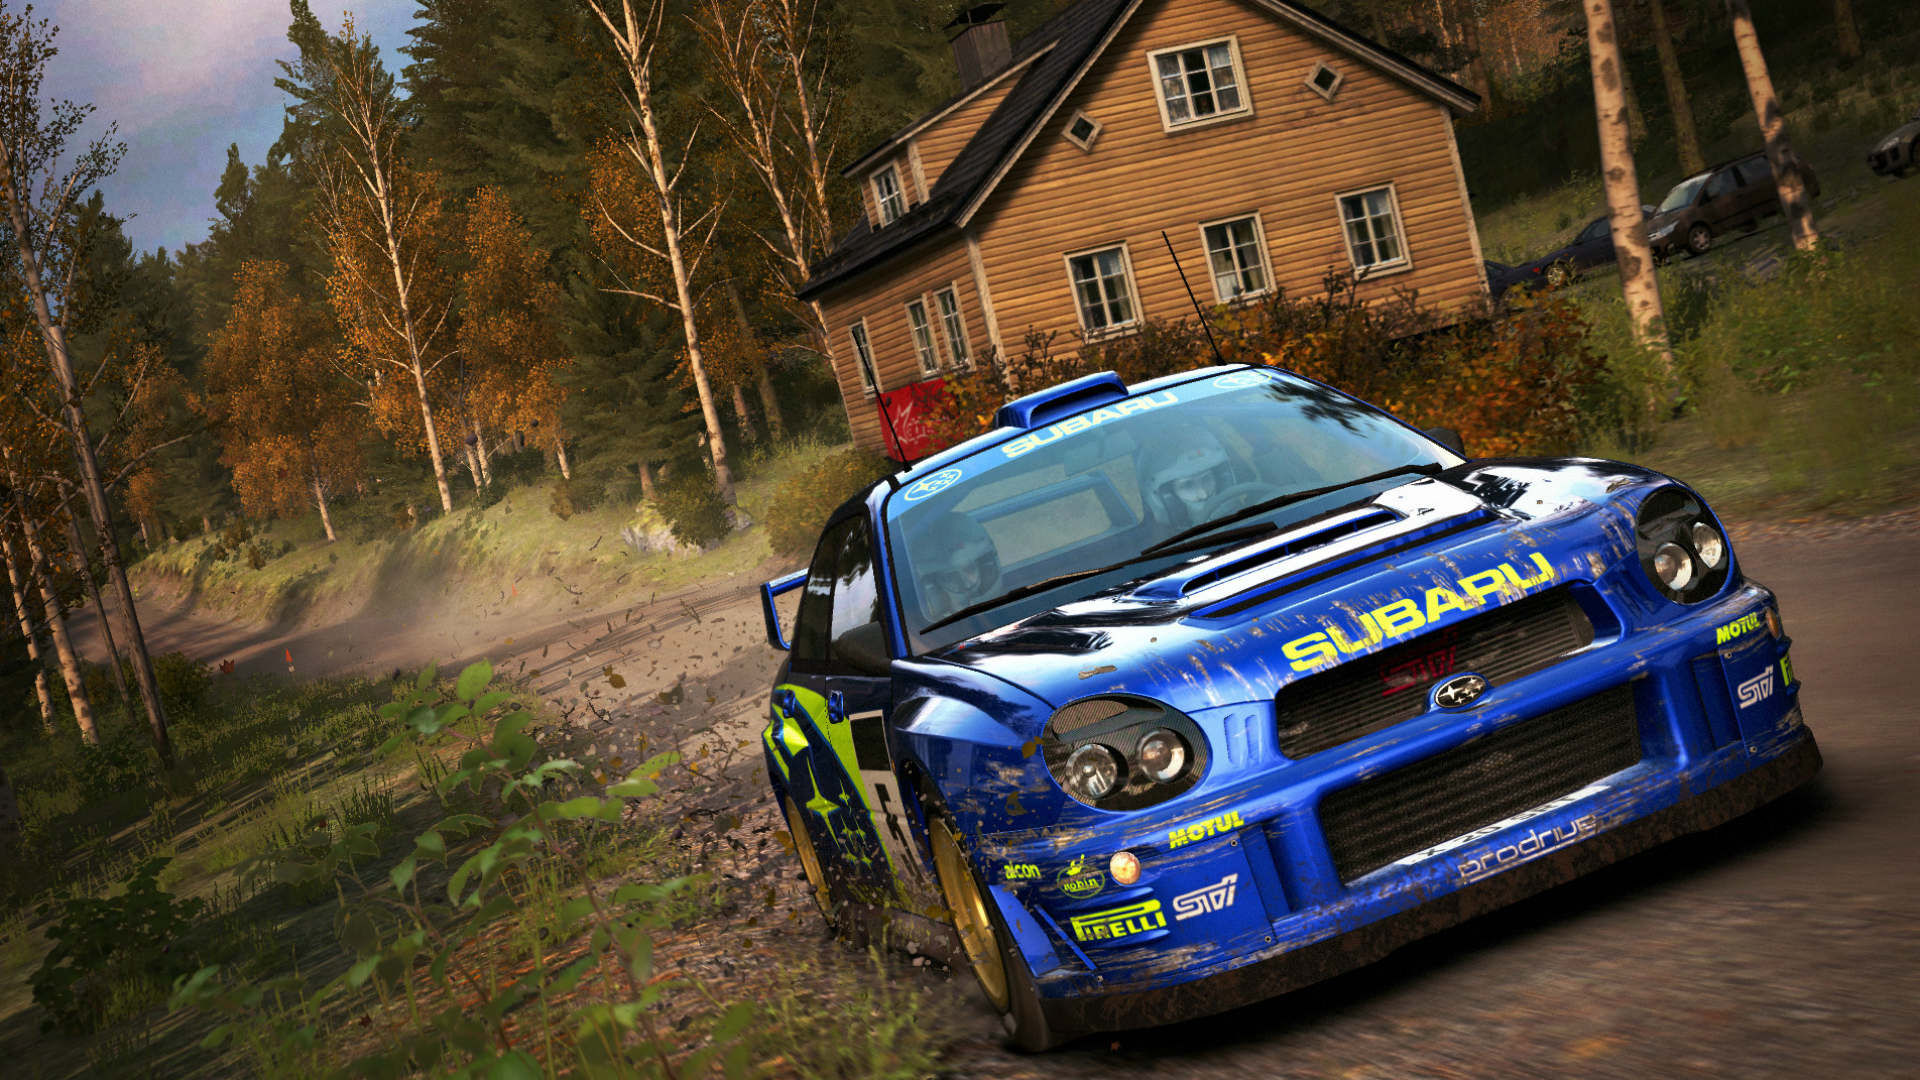 Best simulation games: Dirt Rally. Image shows a car in a forest.